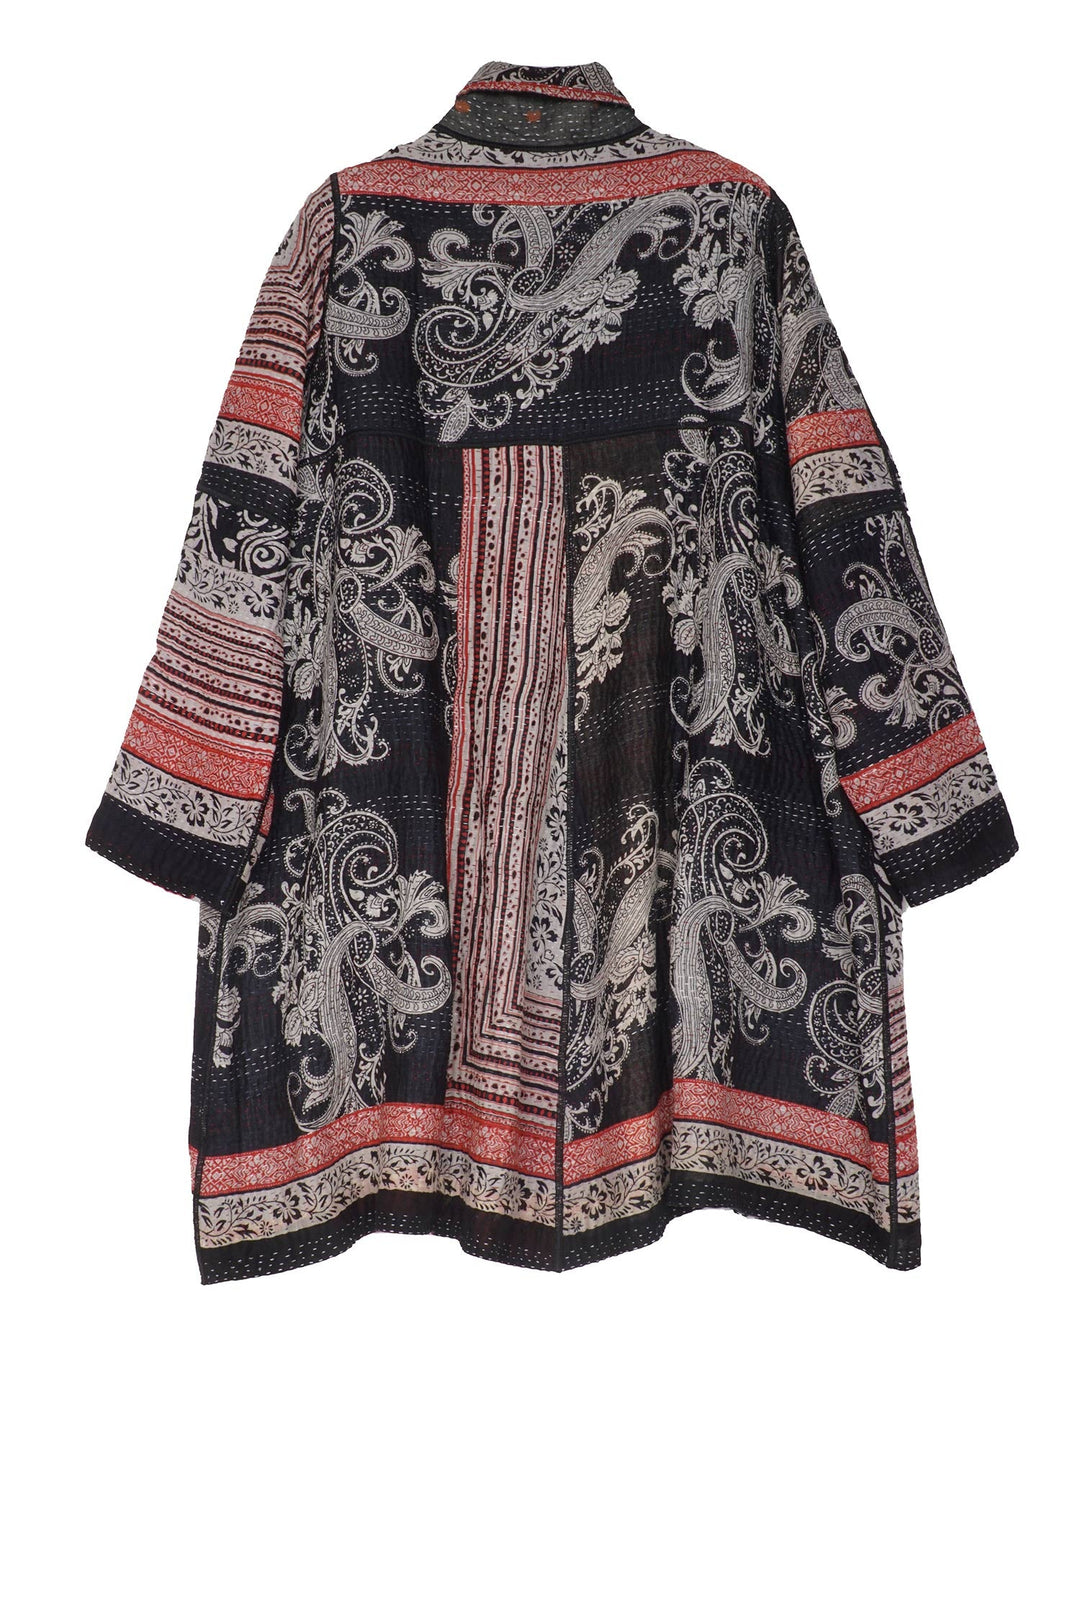 PAISLEY & PATCH KANTHA A-LINE DUSTER - py4311-blk -